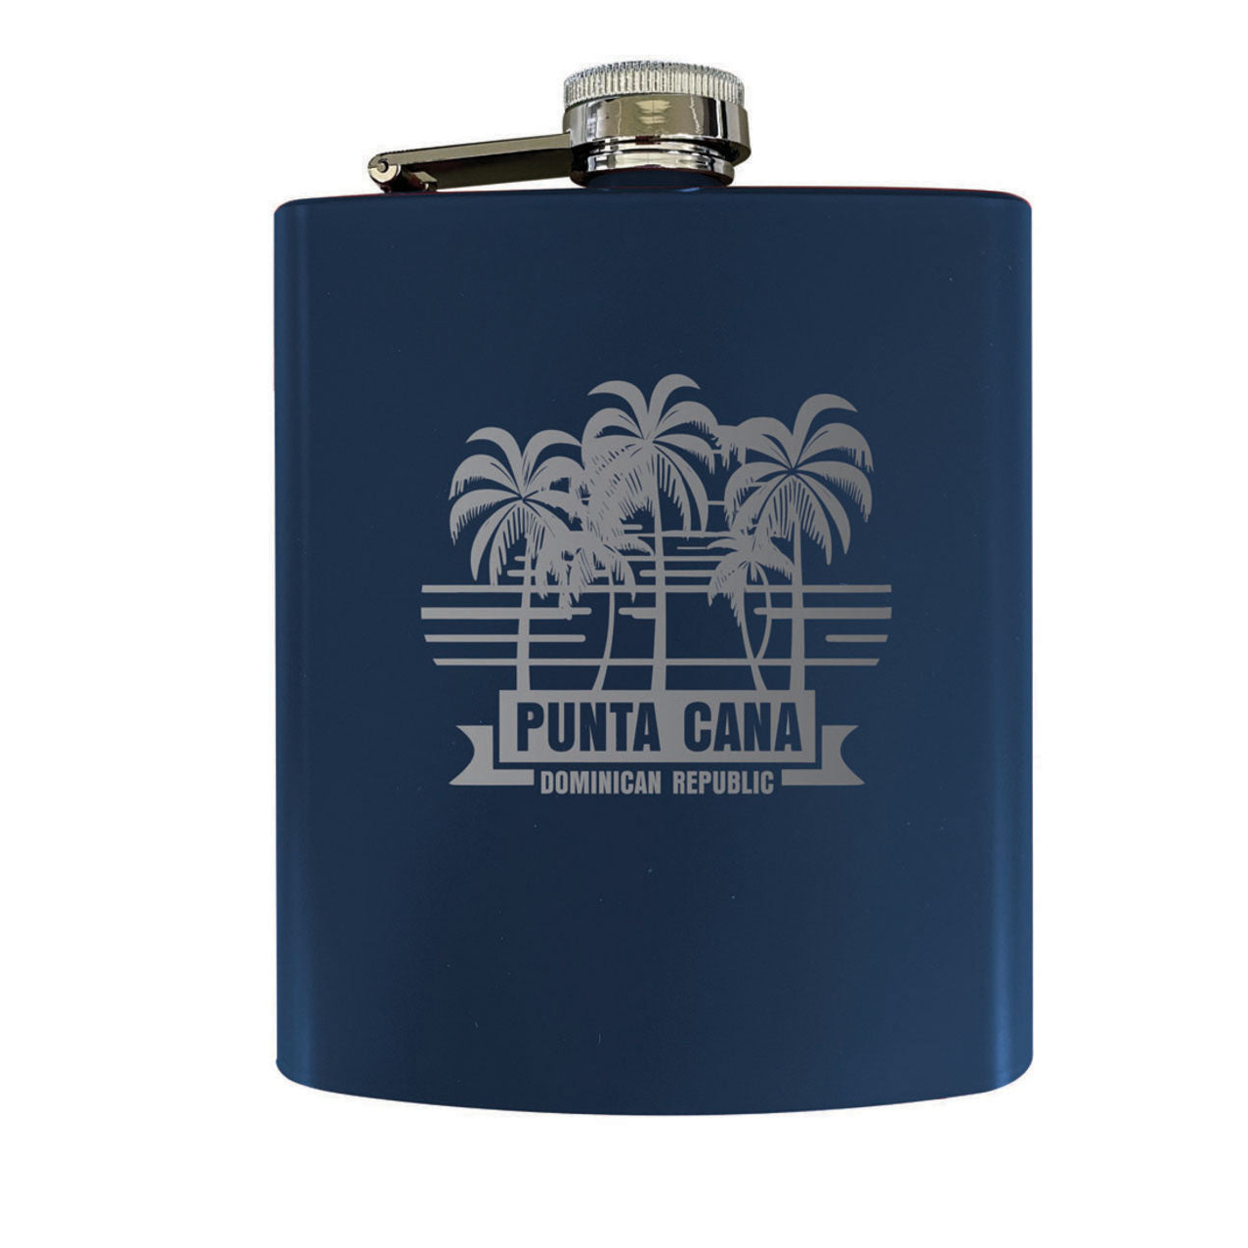 Punta Cana Dominican Republic Souvenir Engraved Matte Finish Stainless Steel 7 Oz Flask - Navy, PALM BEACH